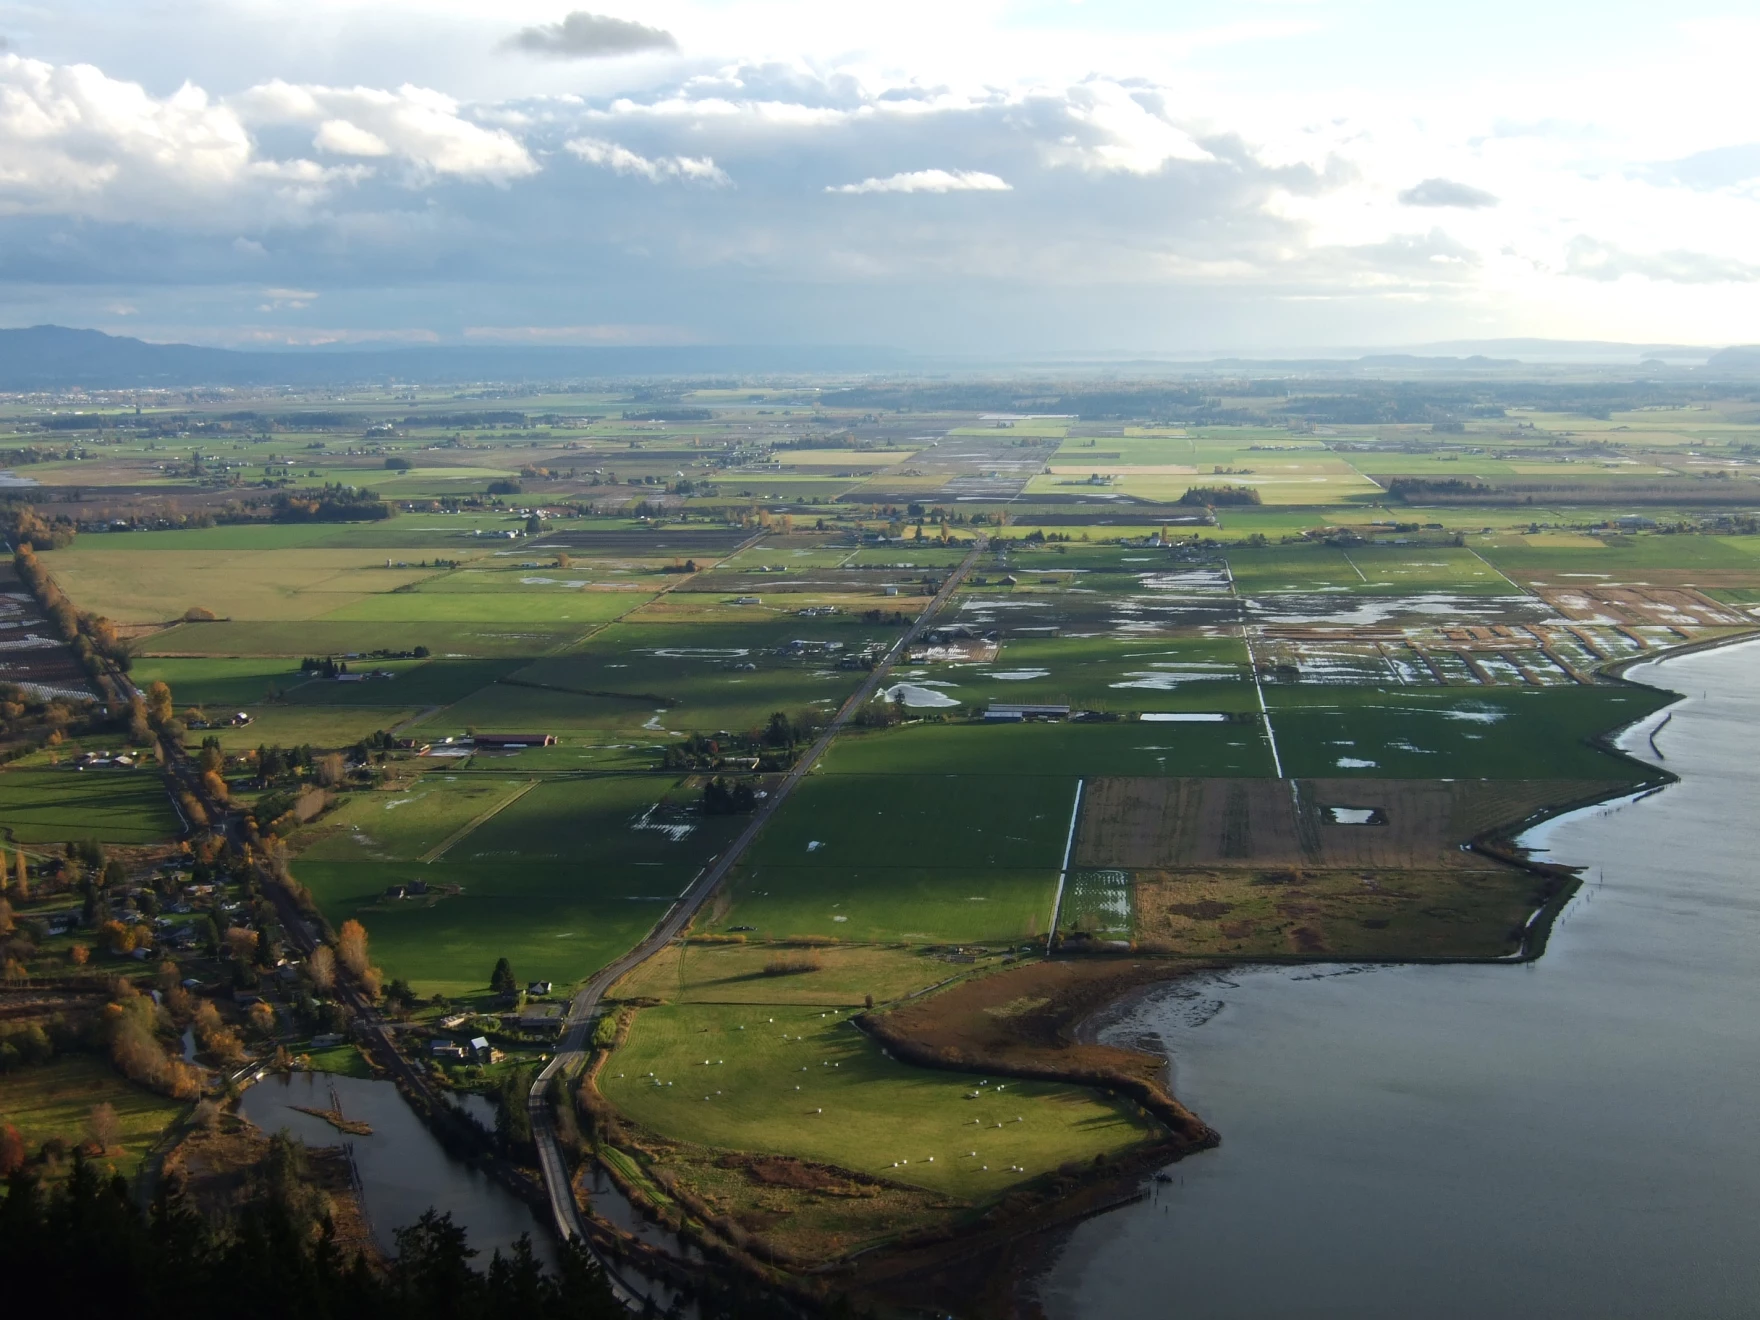 Conversations with farmers in the Skagit Valley, seen here from Samish Overlook, inspired a Democratic state legislator to propose to bar foreign entities from buying Washington croplands